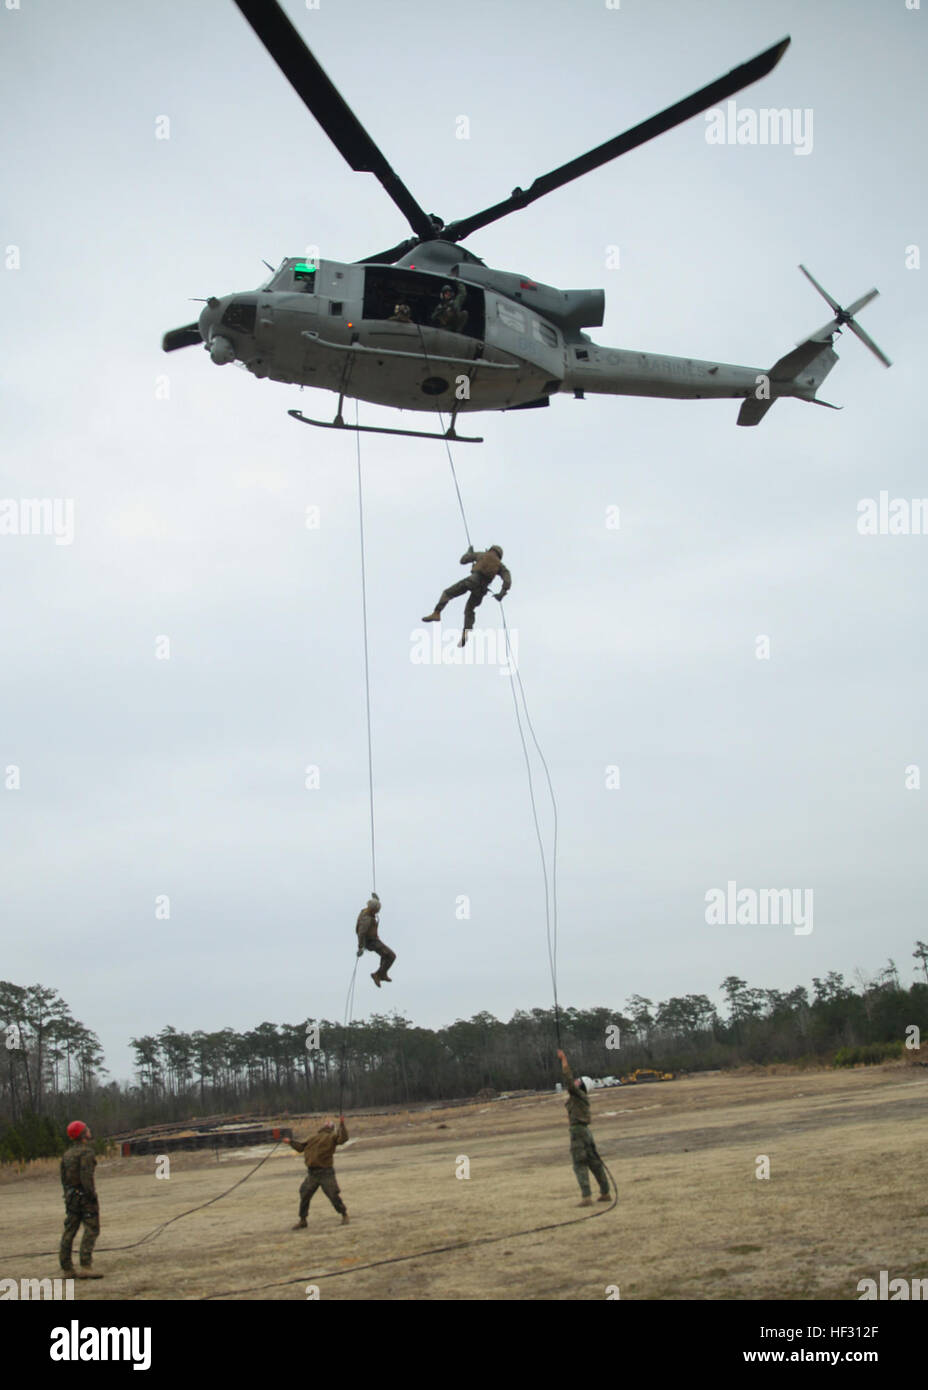 Students rappel from a helicopter during the Helicopter Ropes Suspension Techniques course taught by Expeditionary Operations Training Group March 3, 2015, at Stone Bayaboard Marine Corps Base Camp Lejeune, N.C. The 10-day course teaches Marines to become subject-matter experts at controlling fast-rope or rappelling exercises and units with HRST capabilities make it possible to insert or extract Marines from an area where landing an aircraft would be impractical. (Marine Corps photo by Cpl. Michelle Reif/released) Marines learn to master the ropes during helicopter suspension techniques course Stock Photo